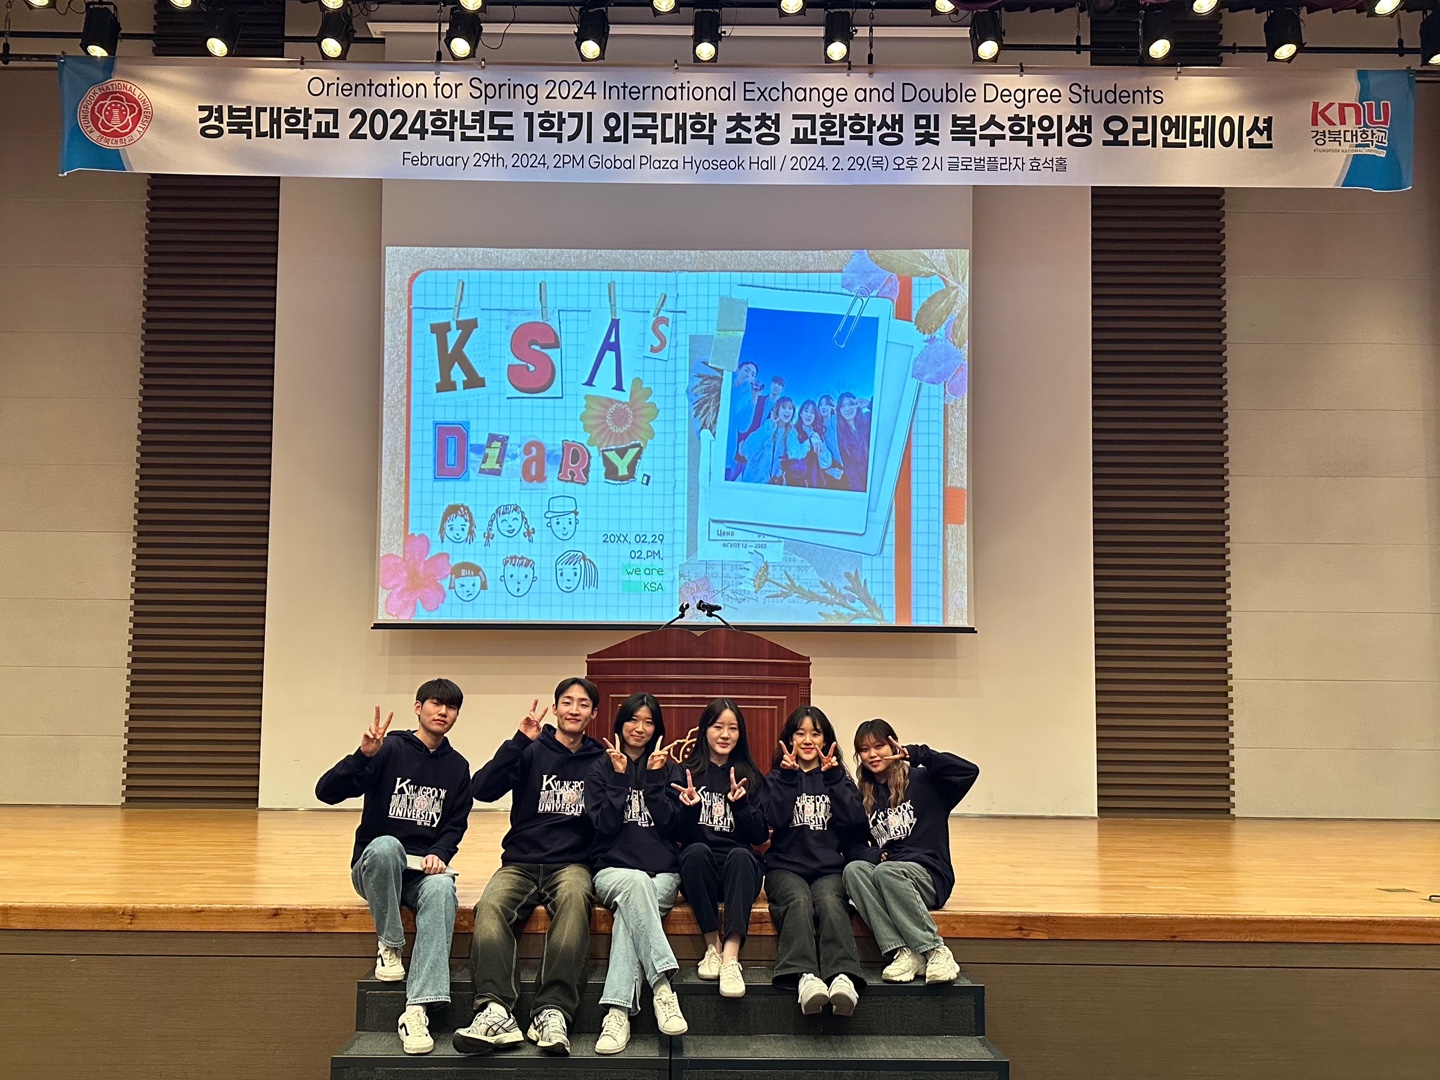 2024 Spring orientation for KNU International exchange and double degree students 관련 이미지입니다